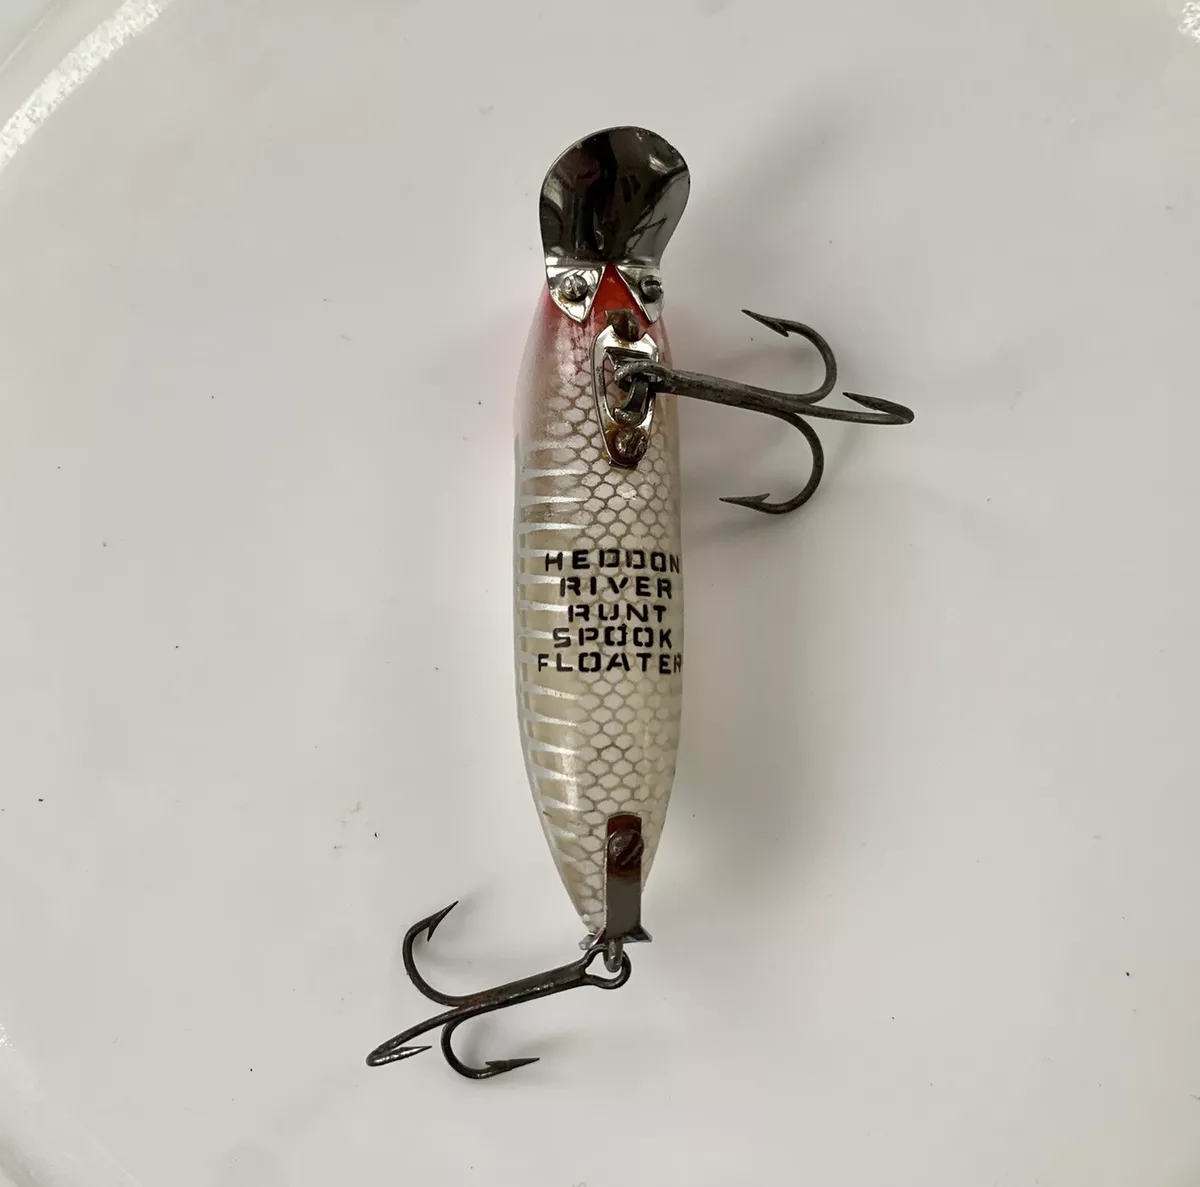 VINTAGE Heddon River Runt Spook Floater Lure - Red White Silver Shore Minnow